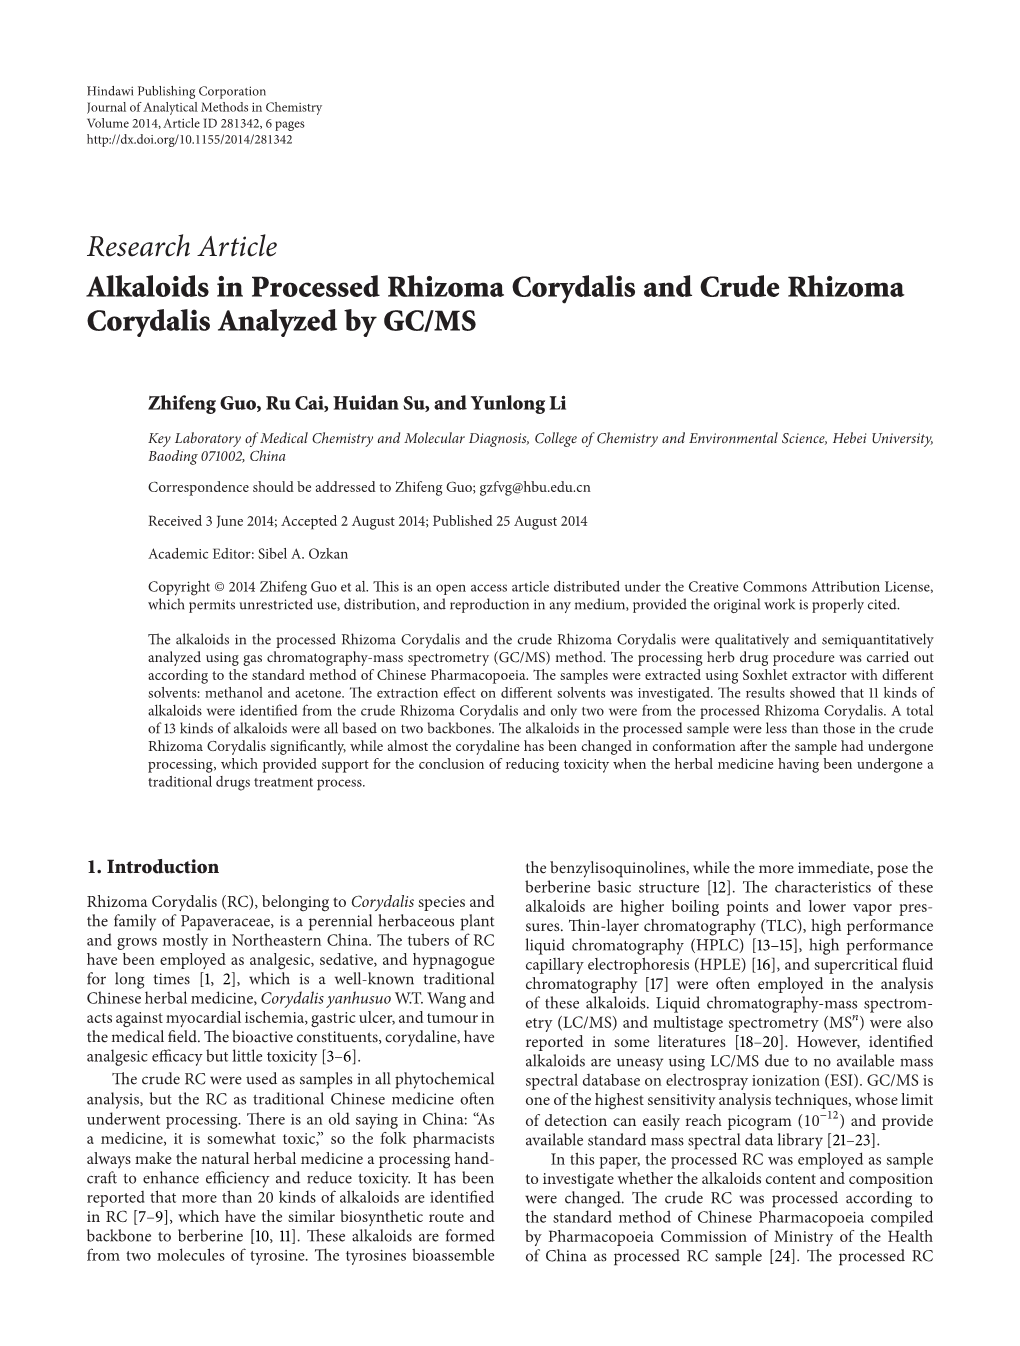 Alkaloids in Processed Rhizoma Corydalis and Crude Rhizoma Corydalis Analyzed by GC/MS